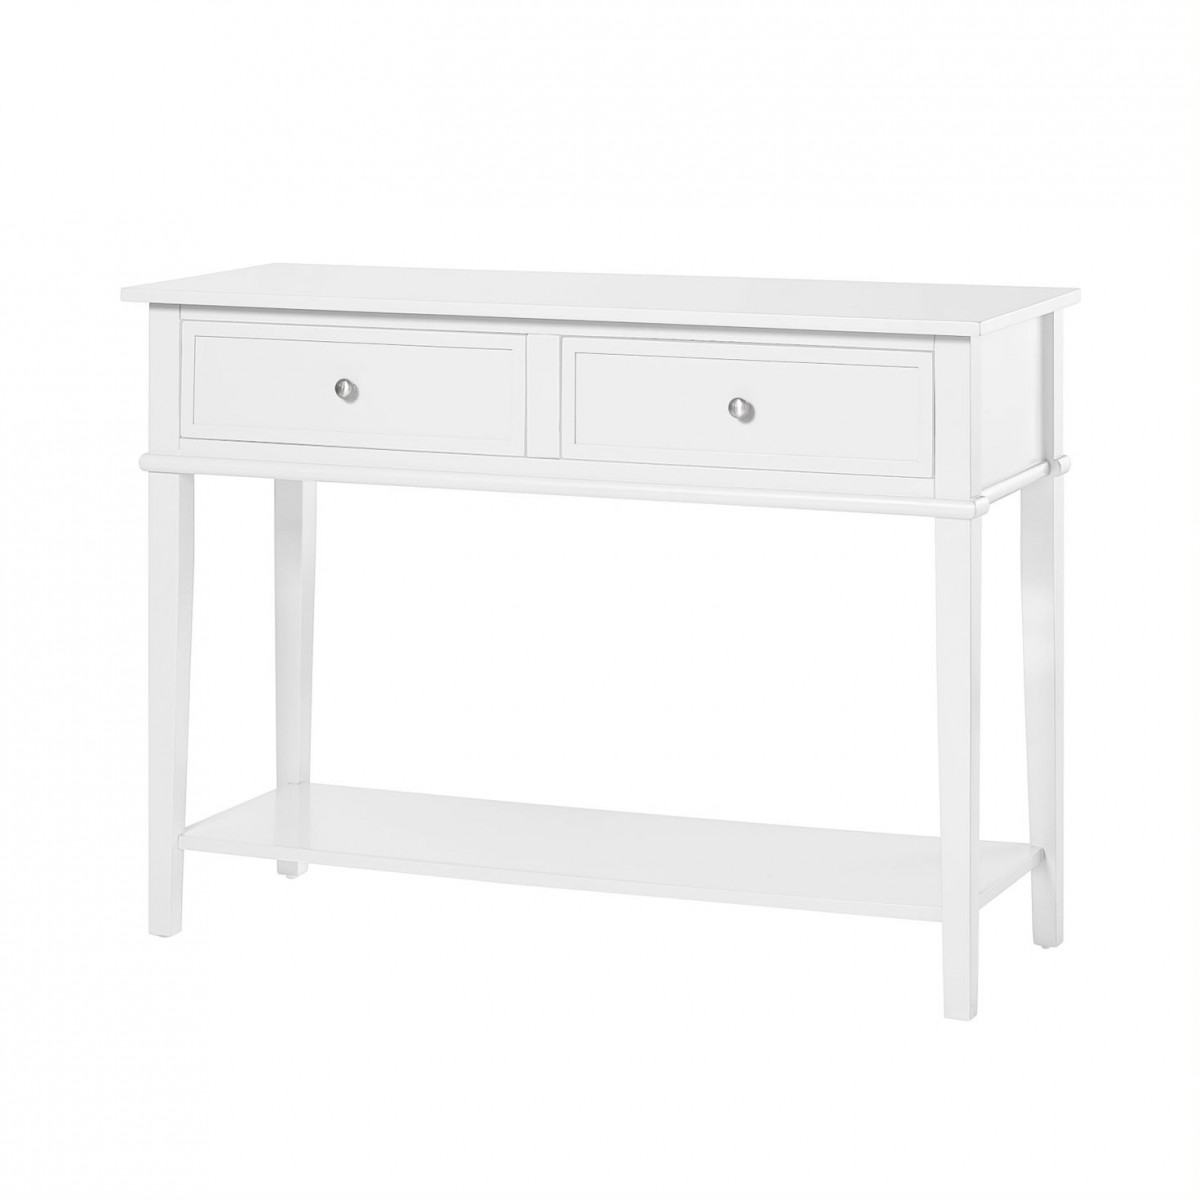 Dorel Franklin 2 Drawer Console Table Grey Black or White Wood